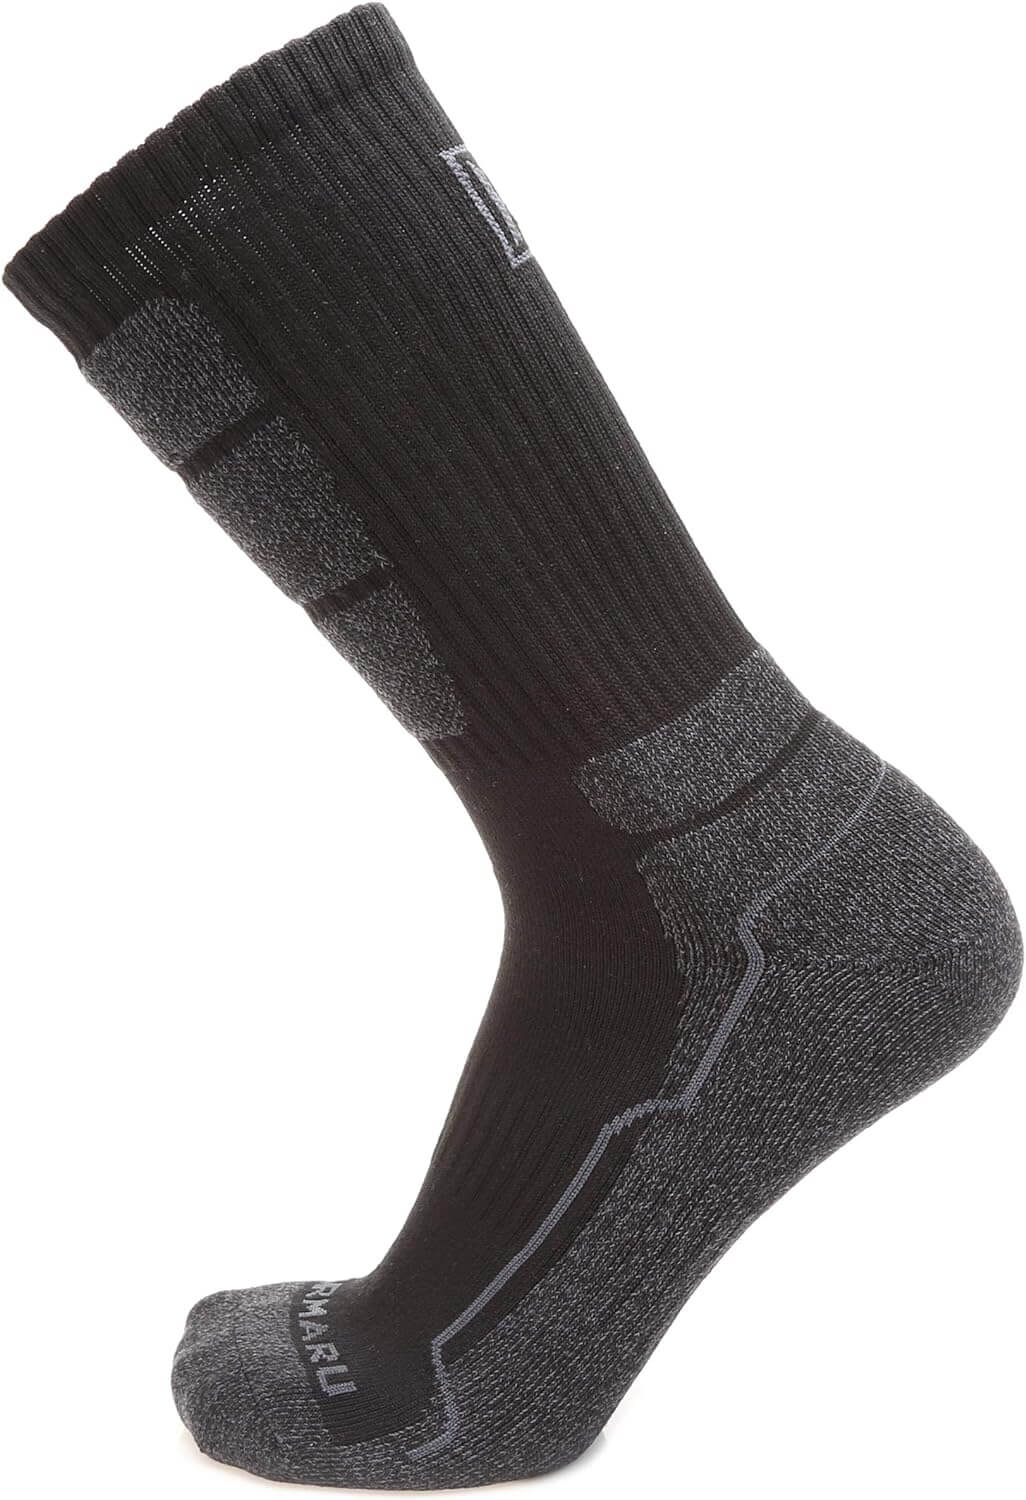 Shop The Latest >Men's 5 Pairs Hiking Outdoor Trekking Crew Socks > *Only $40.49*> From The Top Brand > *MIRMARUl* > Shop Now and Get Free Shipping On Orders Over $45.00 >*Shop Earth Foot*